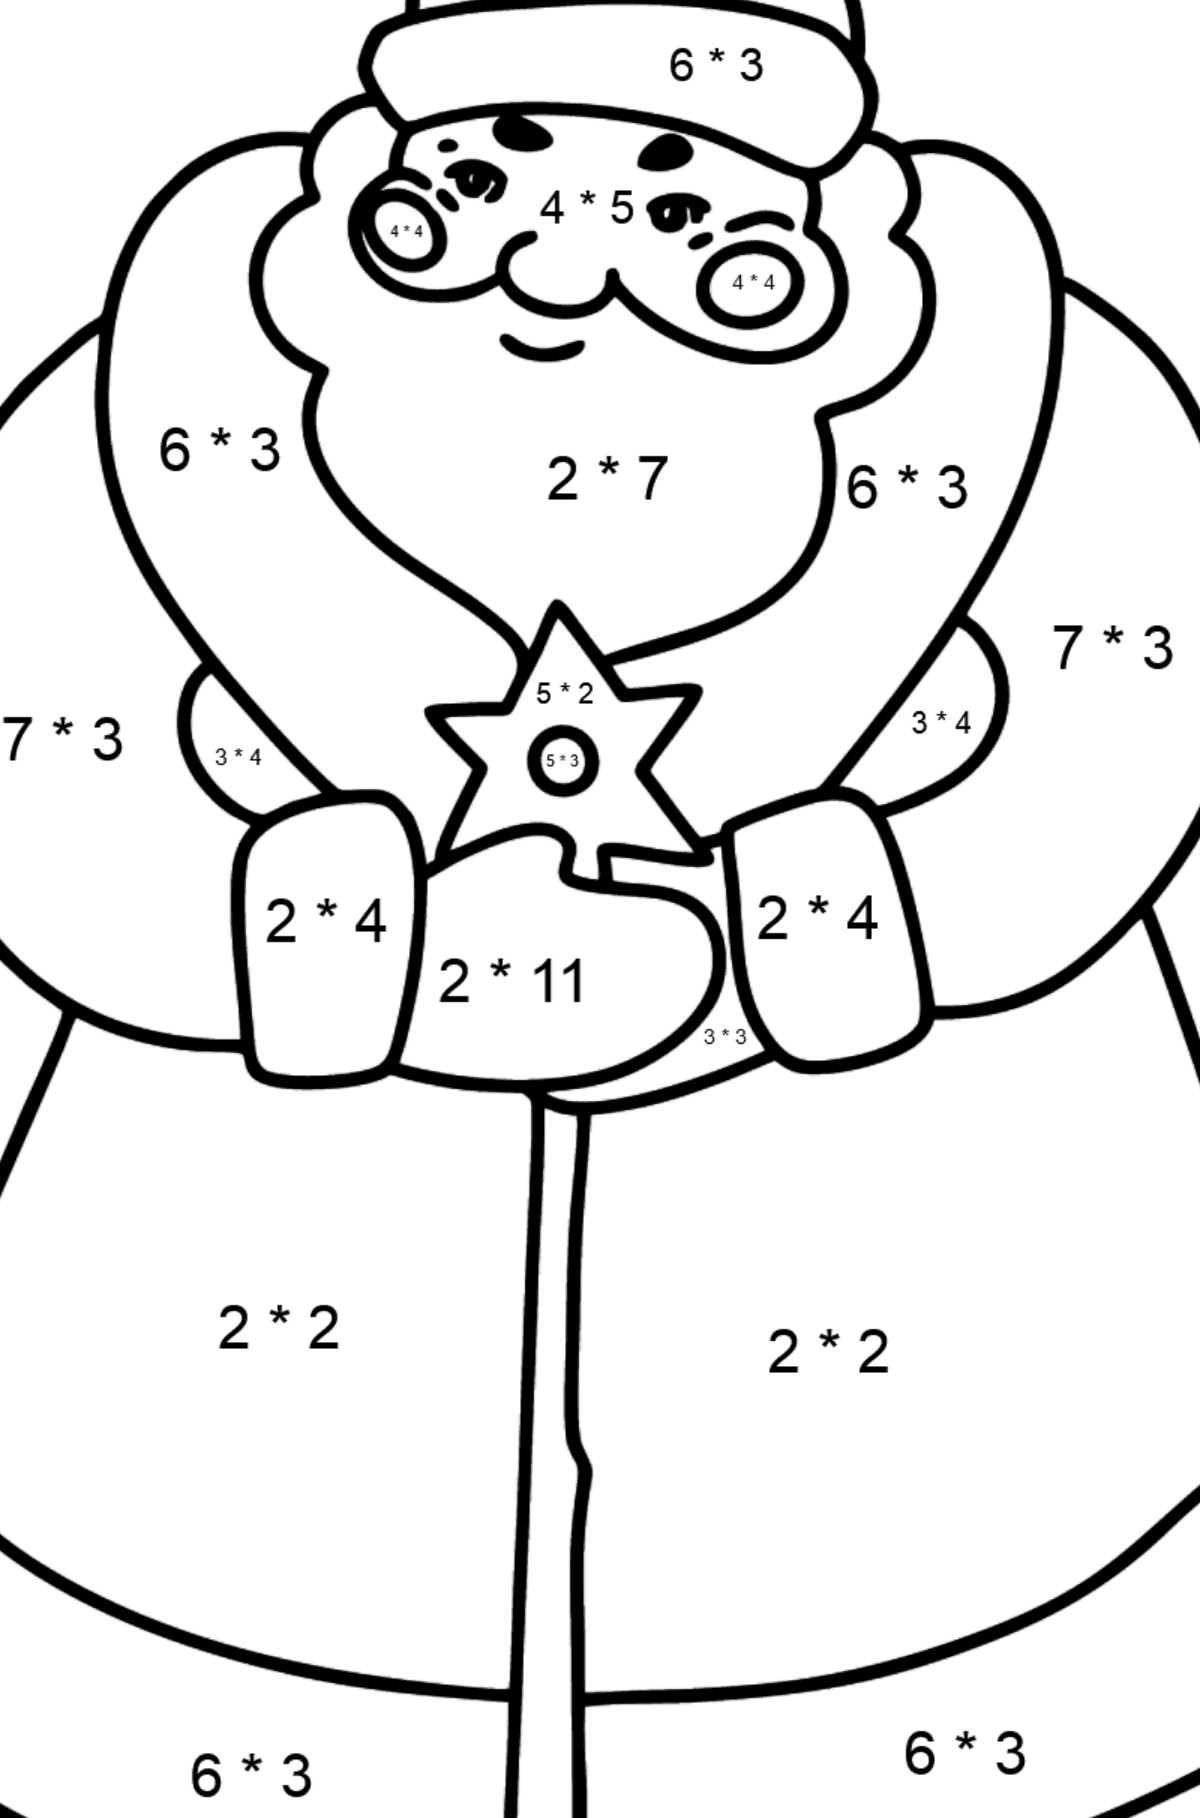 Good Father Frost coloring page - Math Coloring - Multiplication for Kids